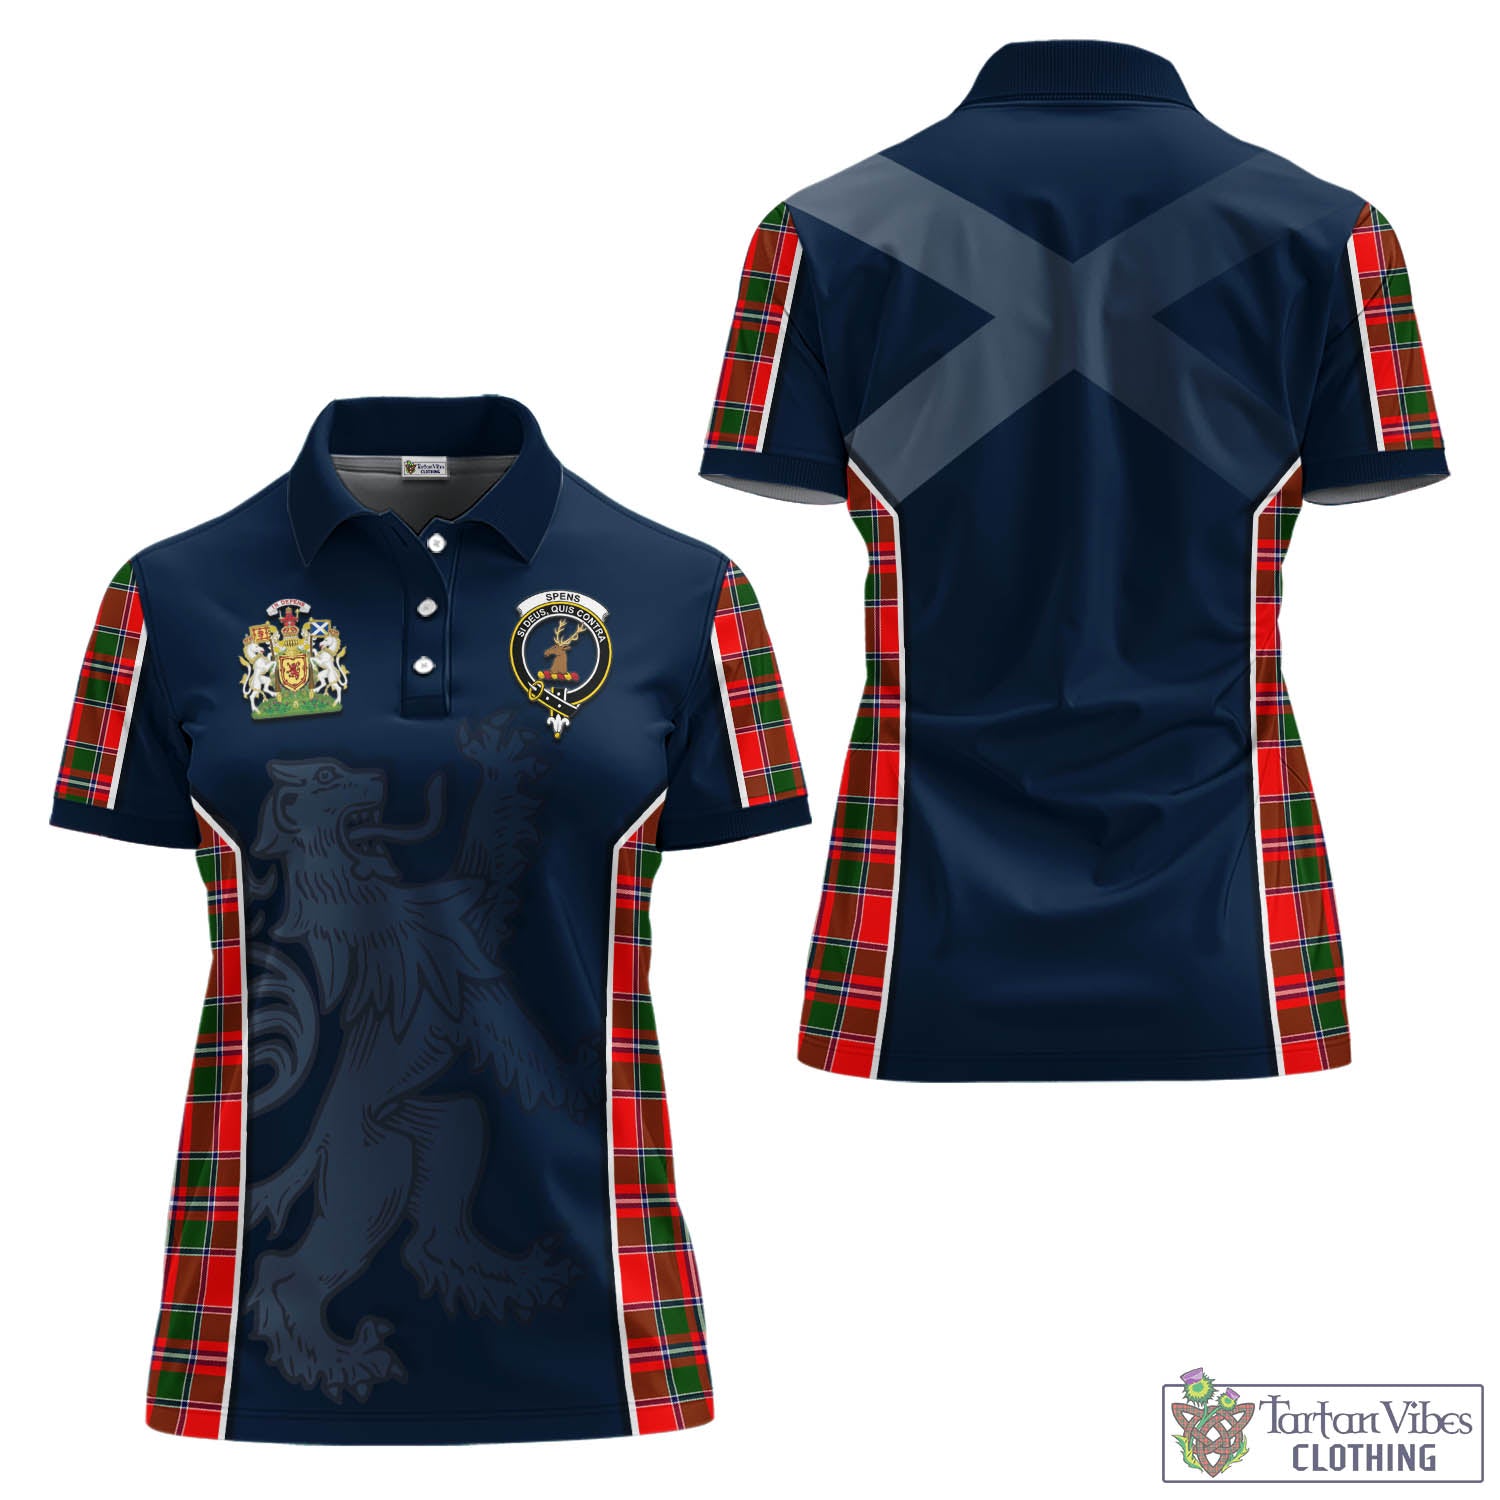 Tartan Vibes Clothing Spens Modern Tartan Women's Polo Shirt with Family Crest and Lion Rampant Vibes Sport Style